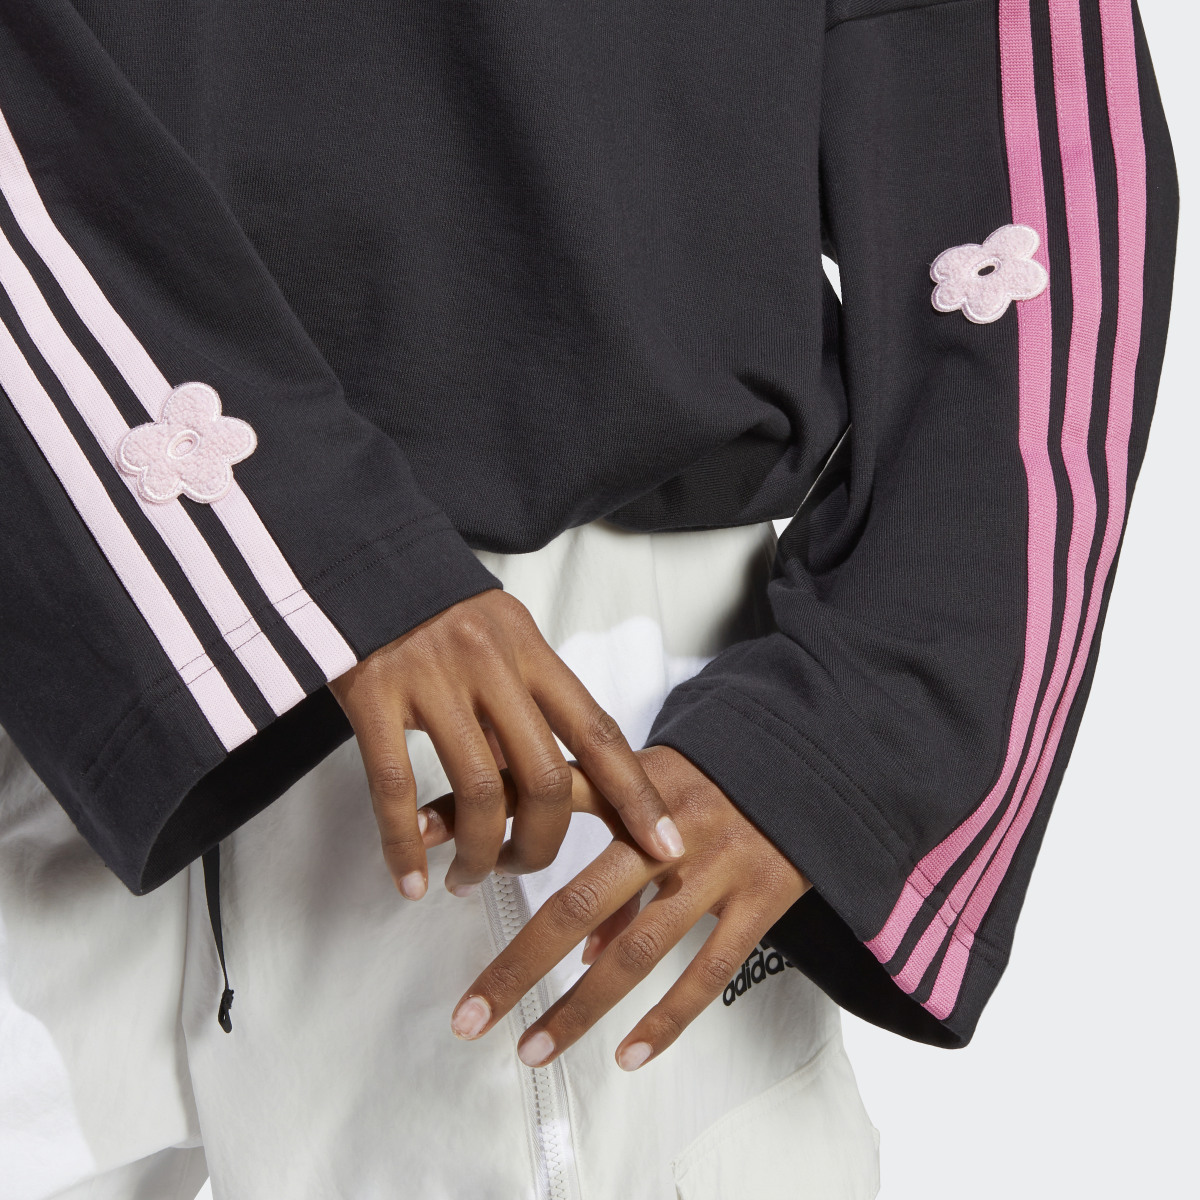 Adidas 3-Stripes Sweatshirt with Chenille Flower Patches. 6